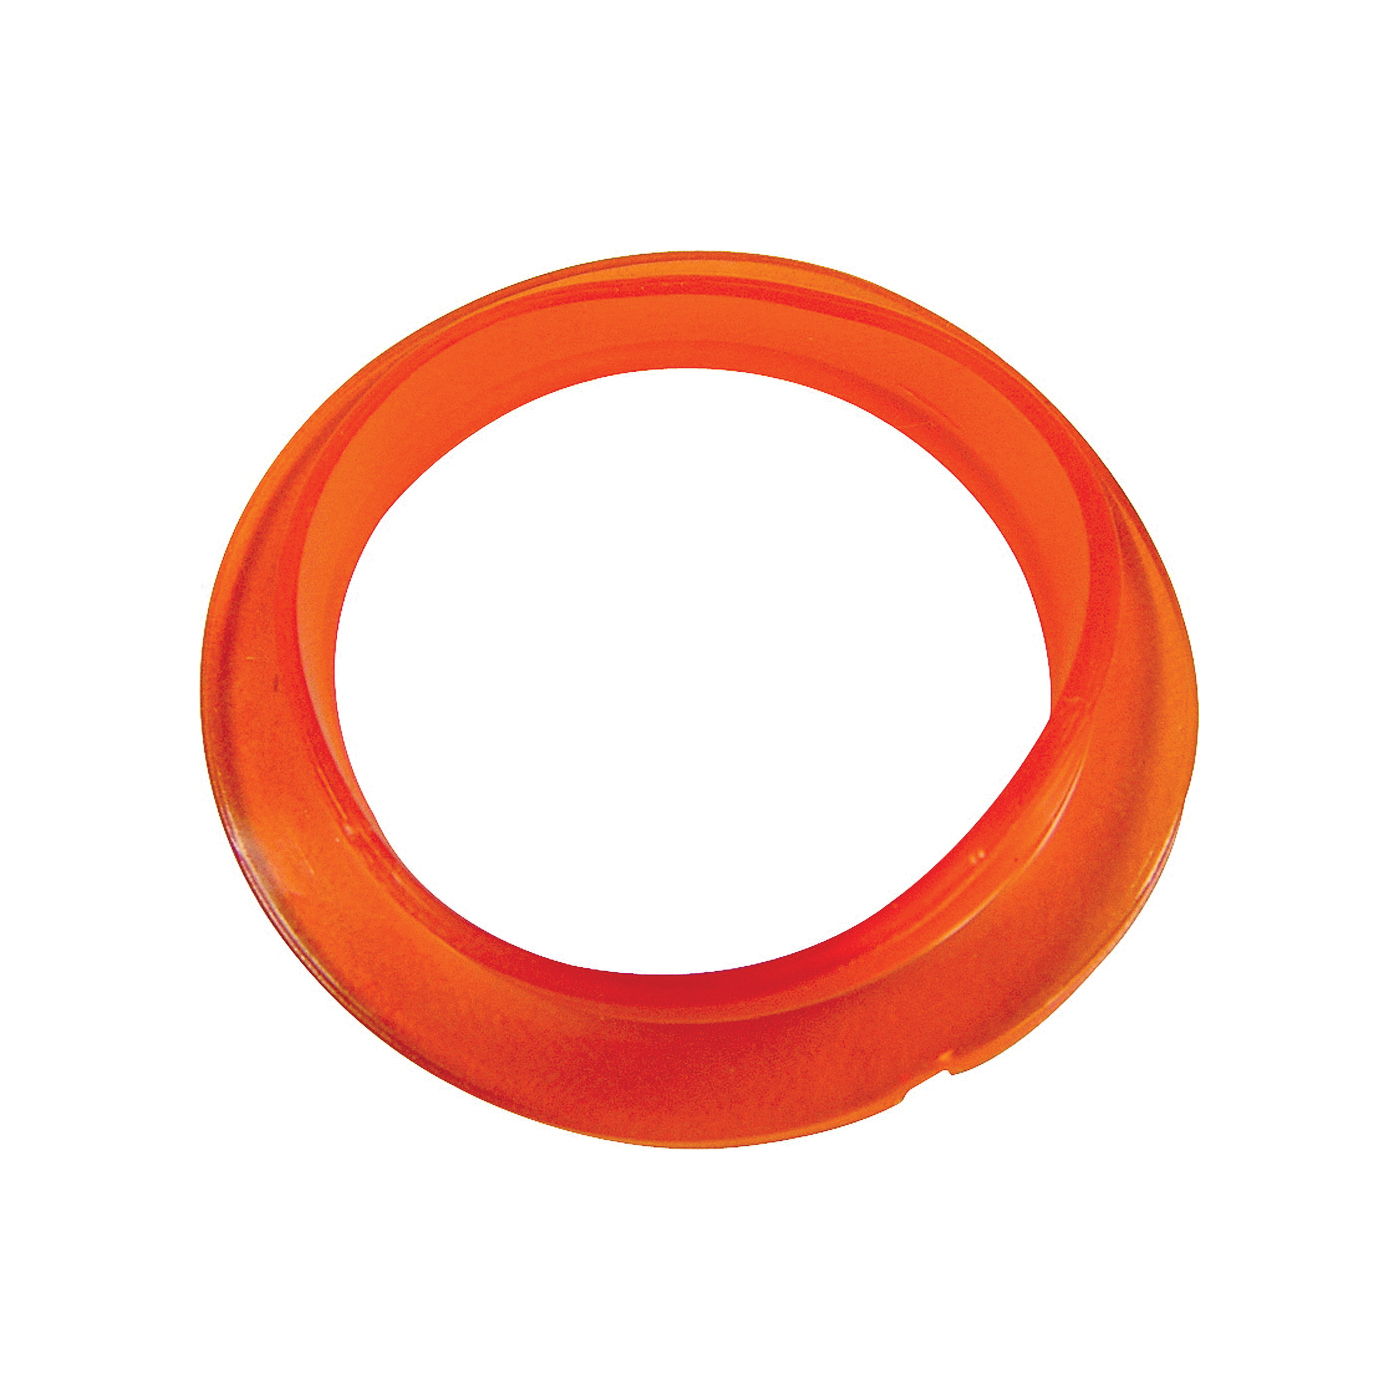 Danco 36622B Nut Washer, 1-3/8 in ID x 1-3/4 in OD Dia, 9/32 in Thick, Polyethylene, For: Sink Strainer Coupling - 1